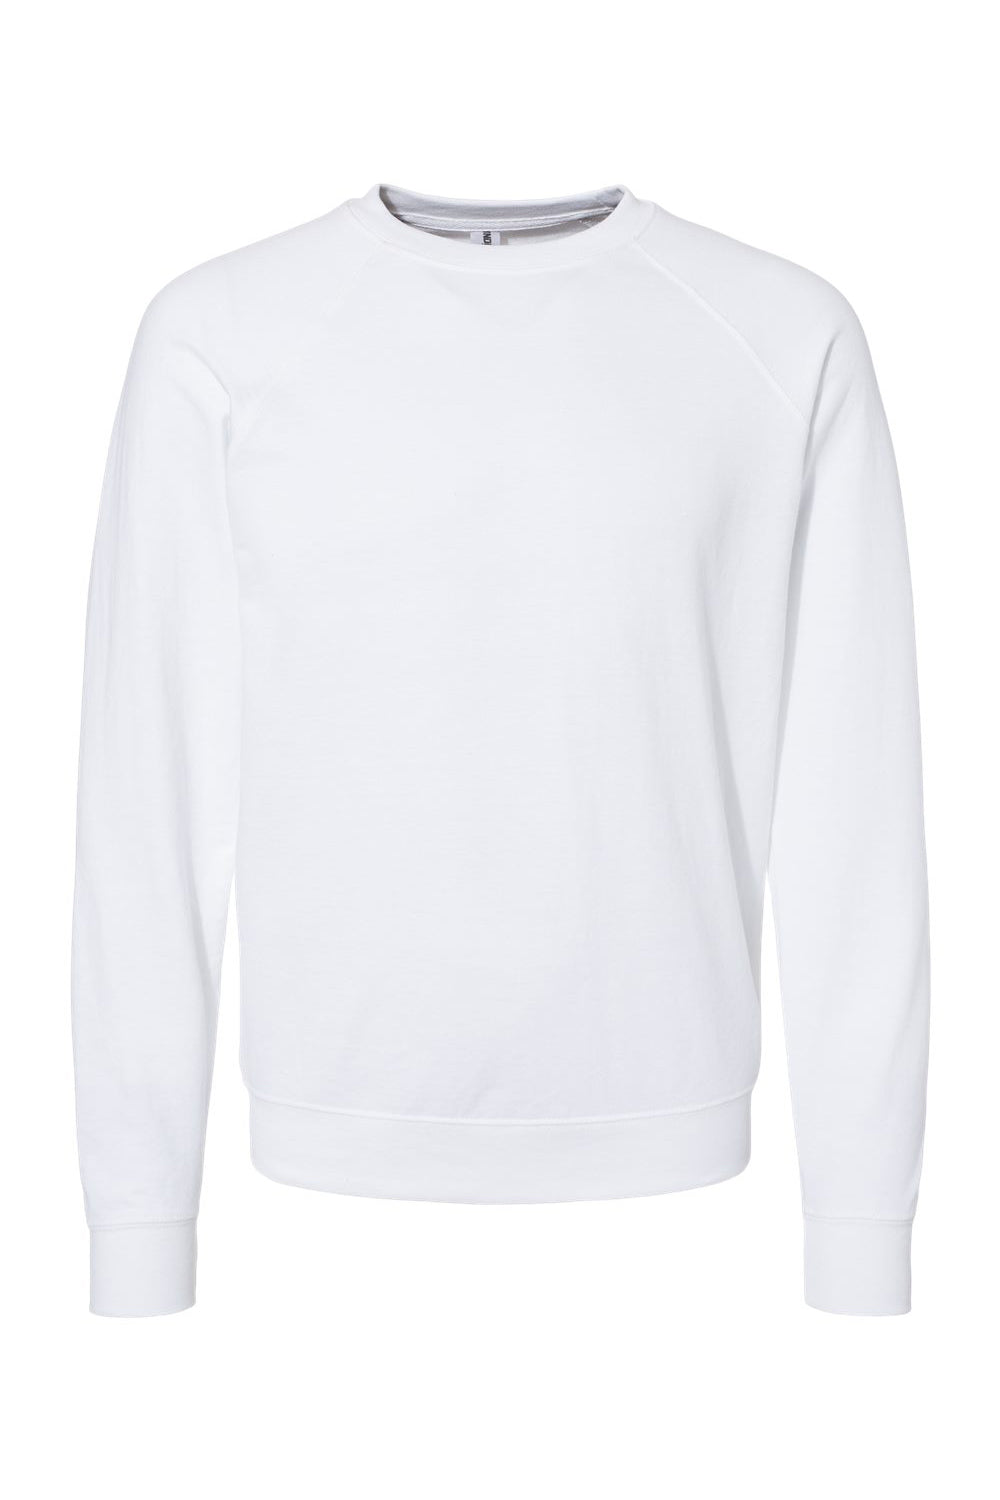 Independent Trading Co. SS1000C Mens Icon Loopback Terry Crewneck Sweatshirt White Flat Front